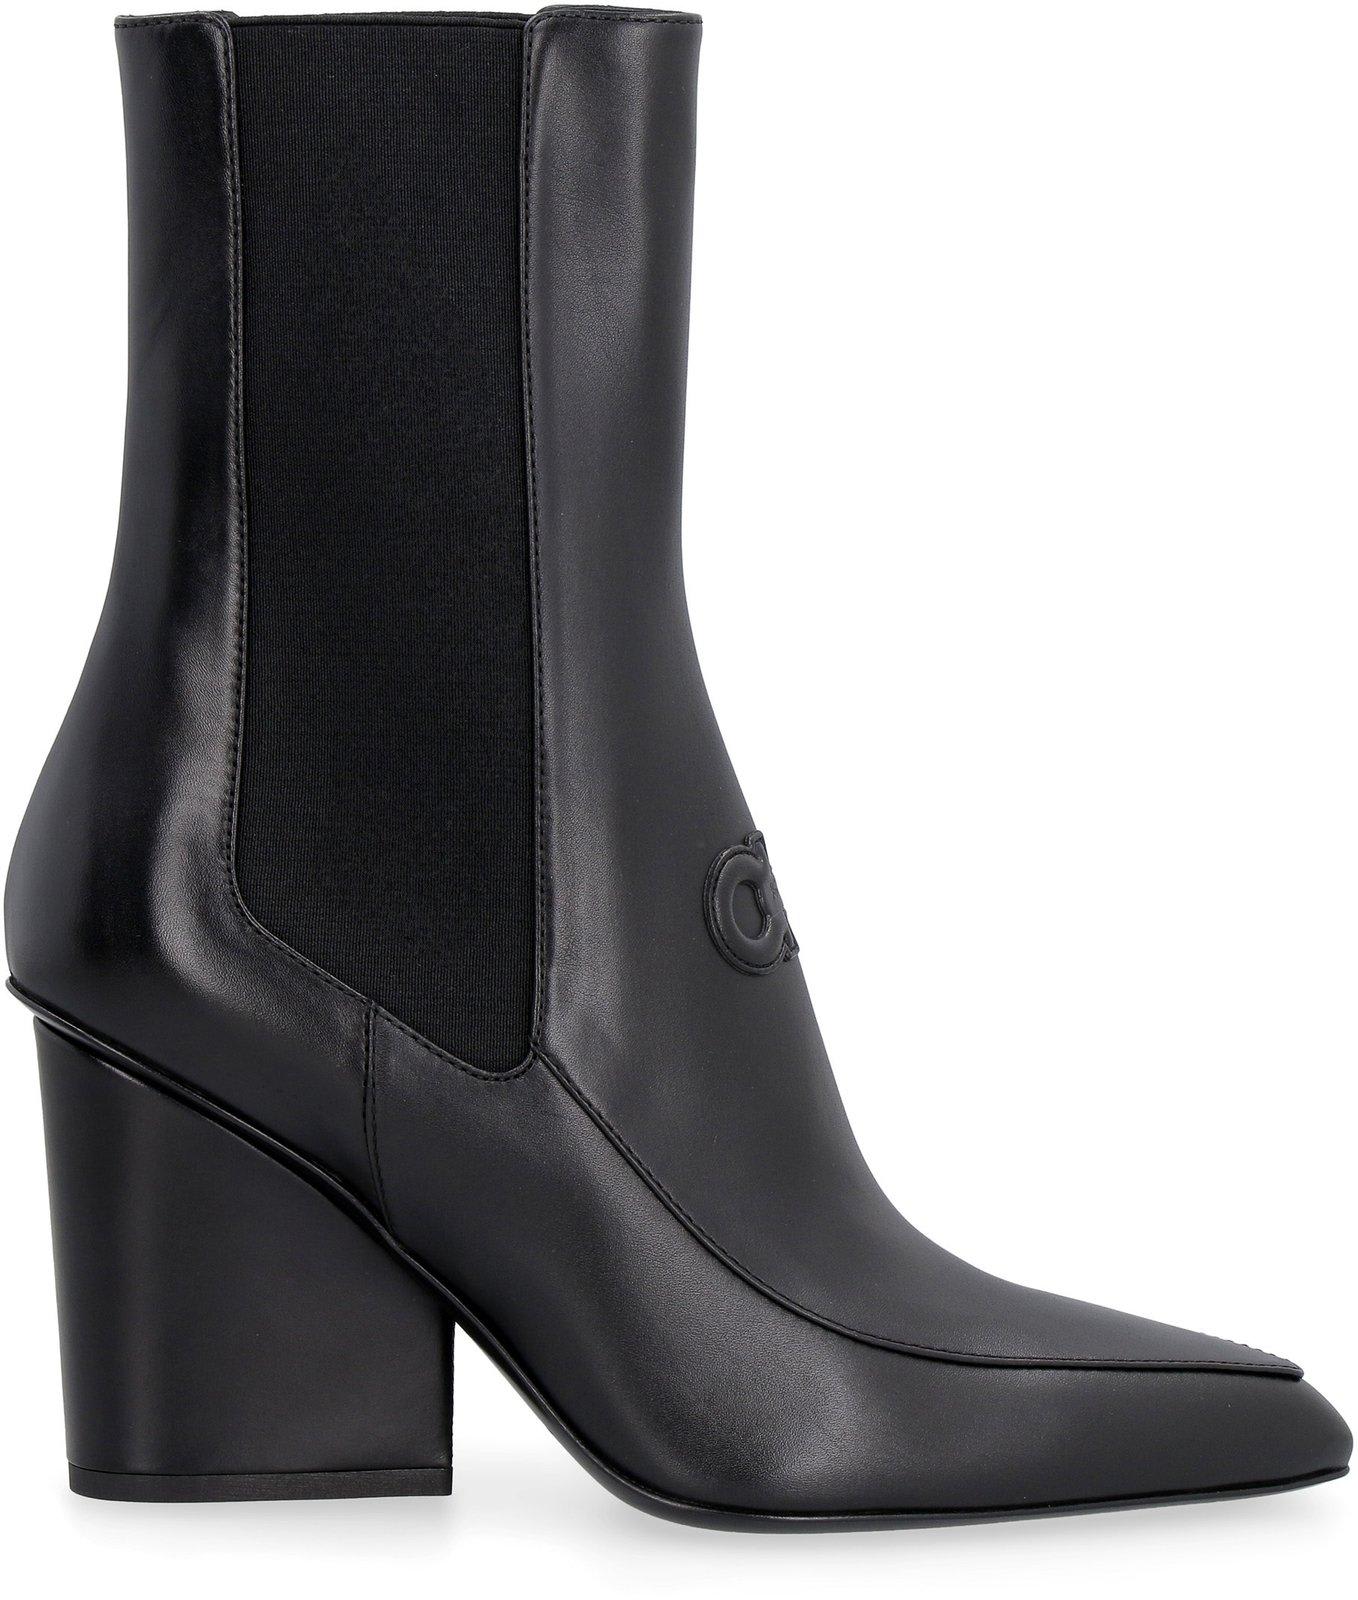 Gancini Ankle Boots